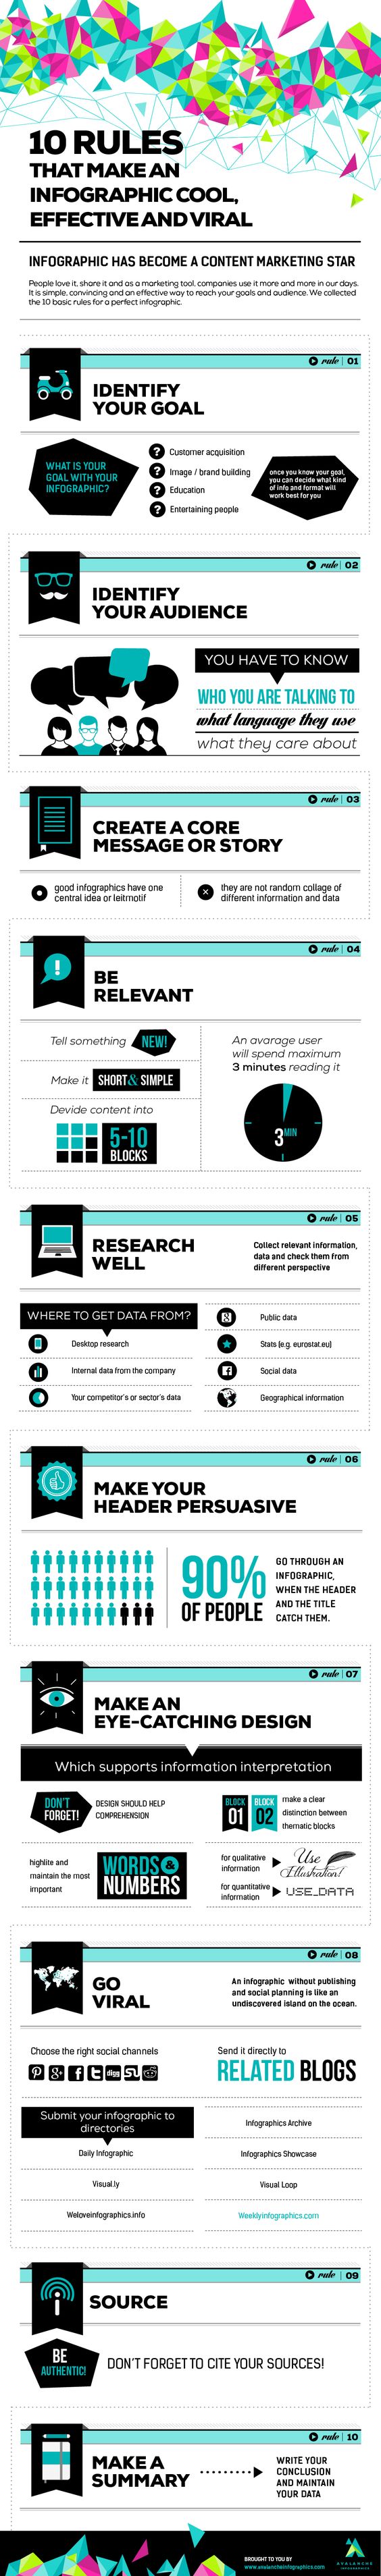 10 Rules For Making An Infographic Effective & Viral #infographic